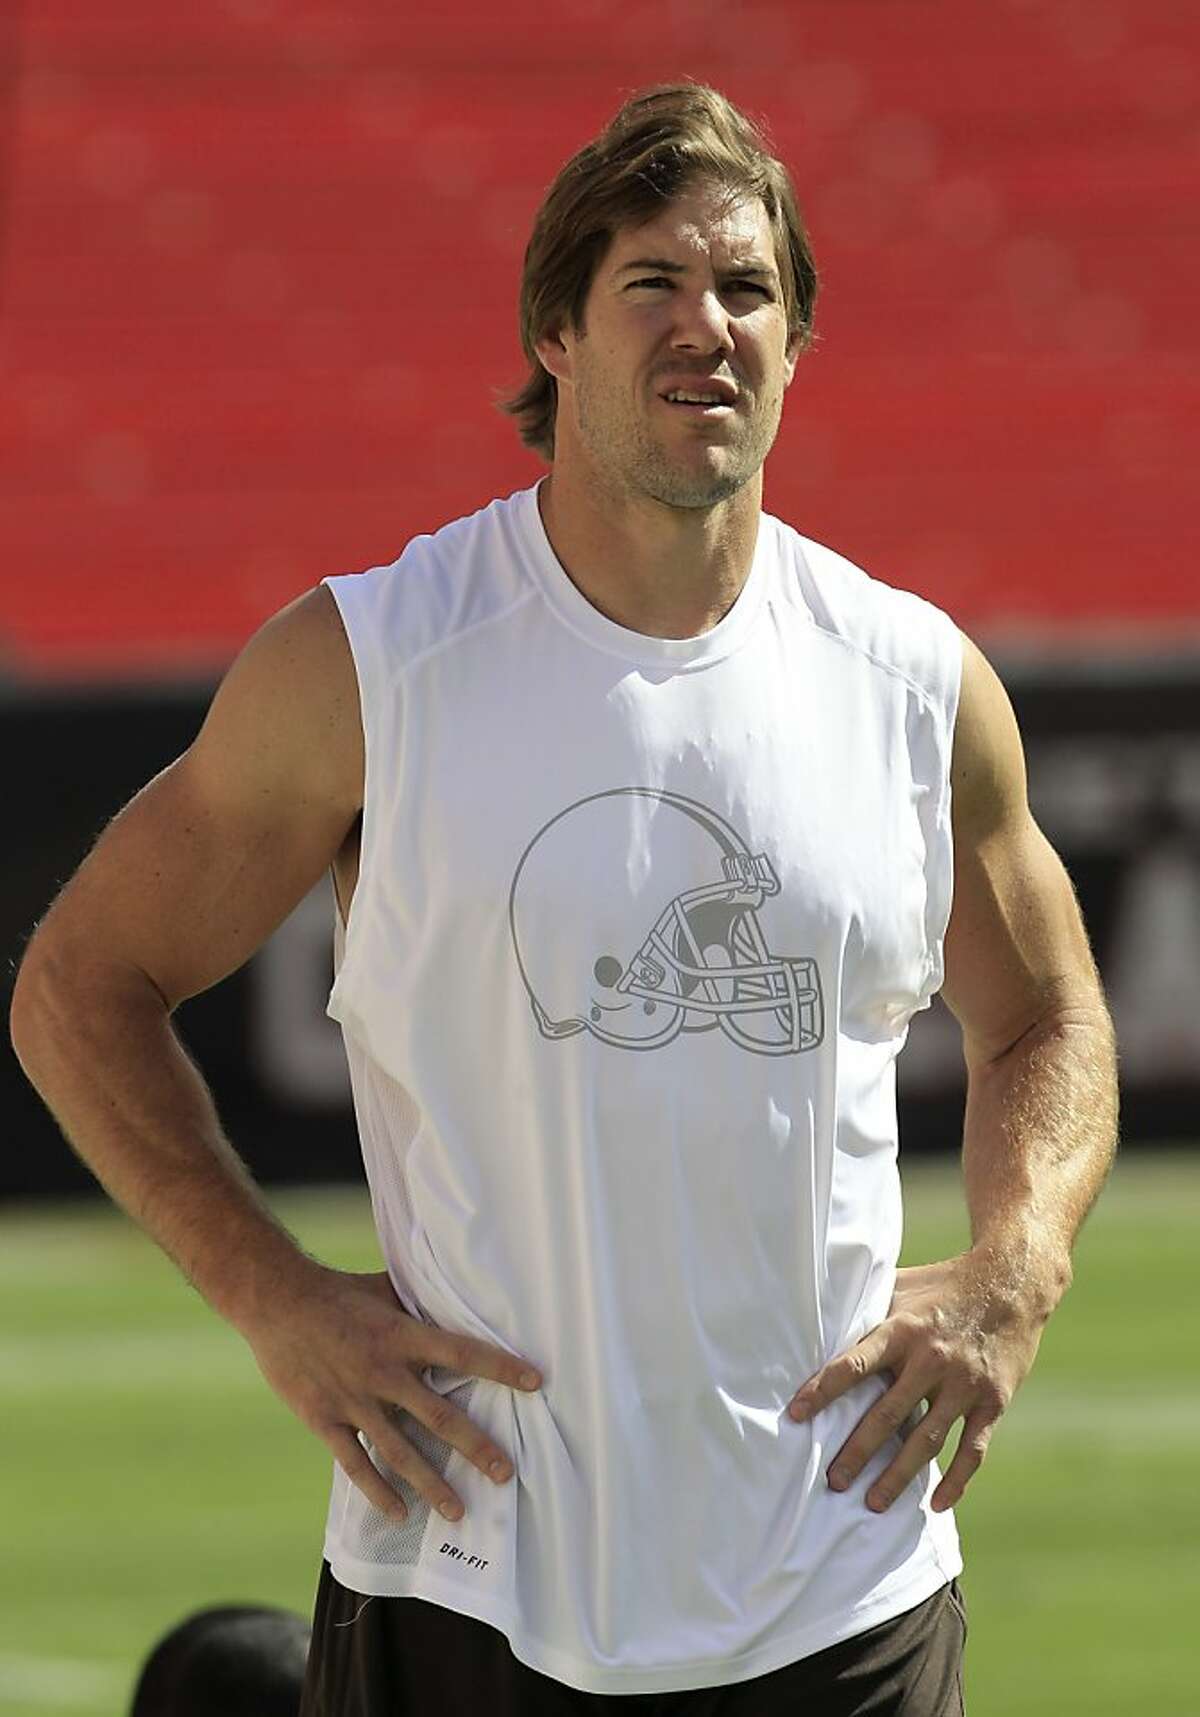 FILE - This Sept. 9, 2012 file photo shows Cleveland Browns linebacker Scott Fujita looking on before an NFL football game against the Philadelphia Eagles, in Cleveland. Fujita has criticized NFL Commissioner Roger Goodell for the way he has handled his suspension in the New Orleans Saints' bounty case. Fujita had his three-game suspension reduced to one on Tuesday, Oct. 9, 2012, by Goodell, who sent the veteran a letter. Fujita says he's pleased Goodell acknowledged he never participated in the pay-for-hits program, but did not like the commissioner's "condescending tone" in a letter to the linebacker. (AP Photo/Tony Dejak, File)